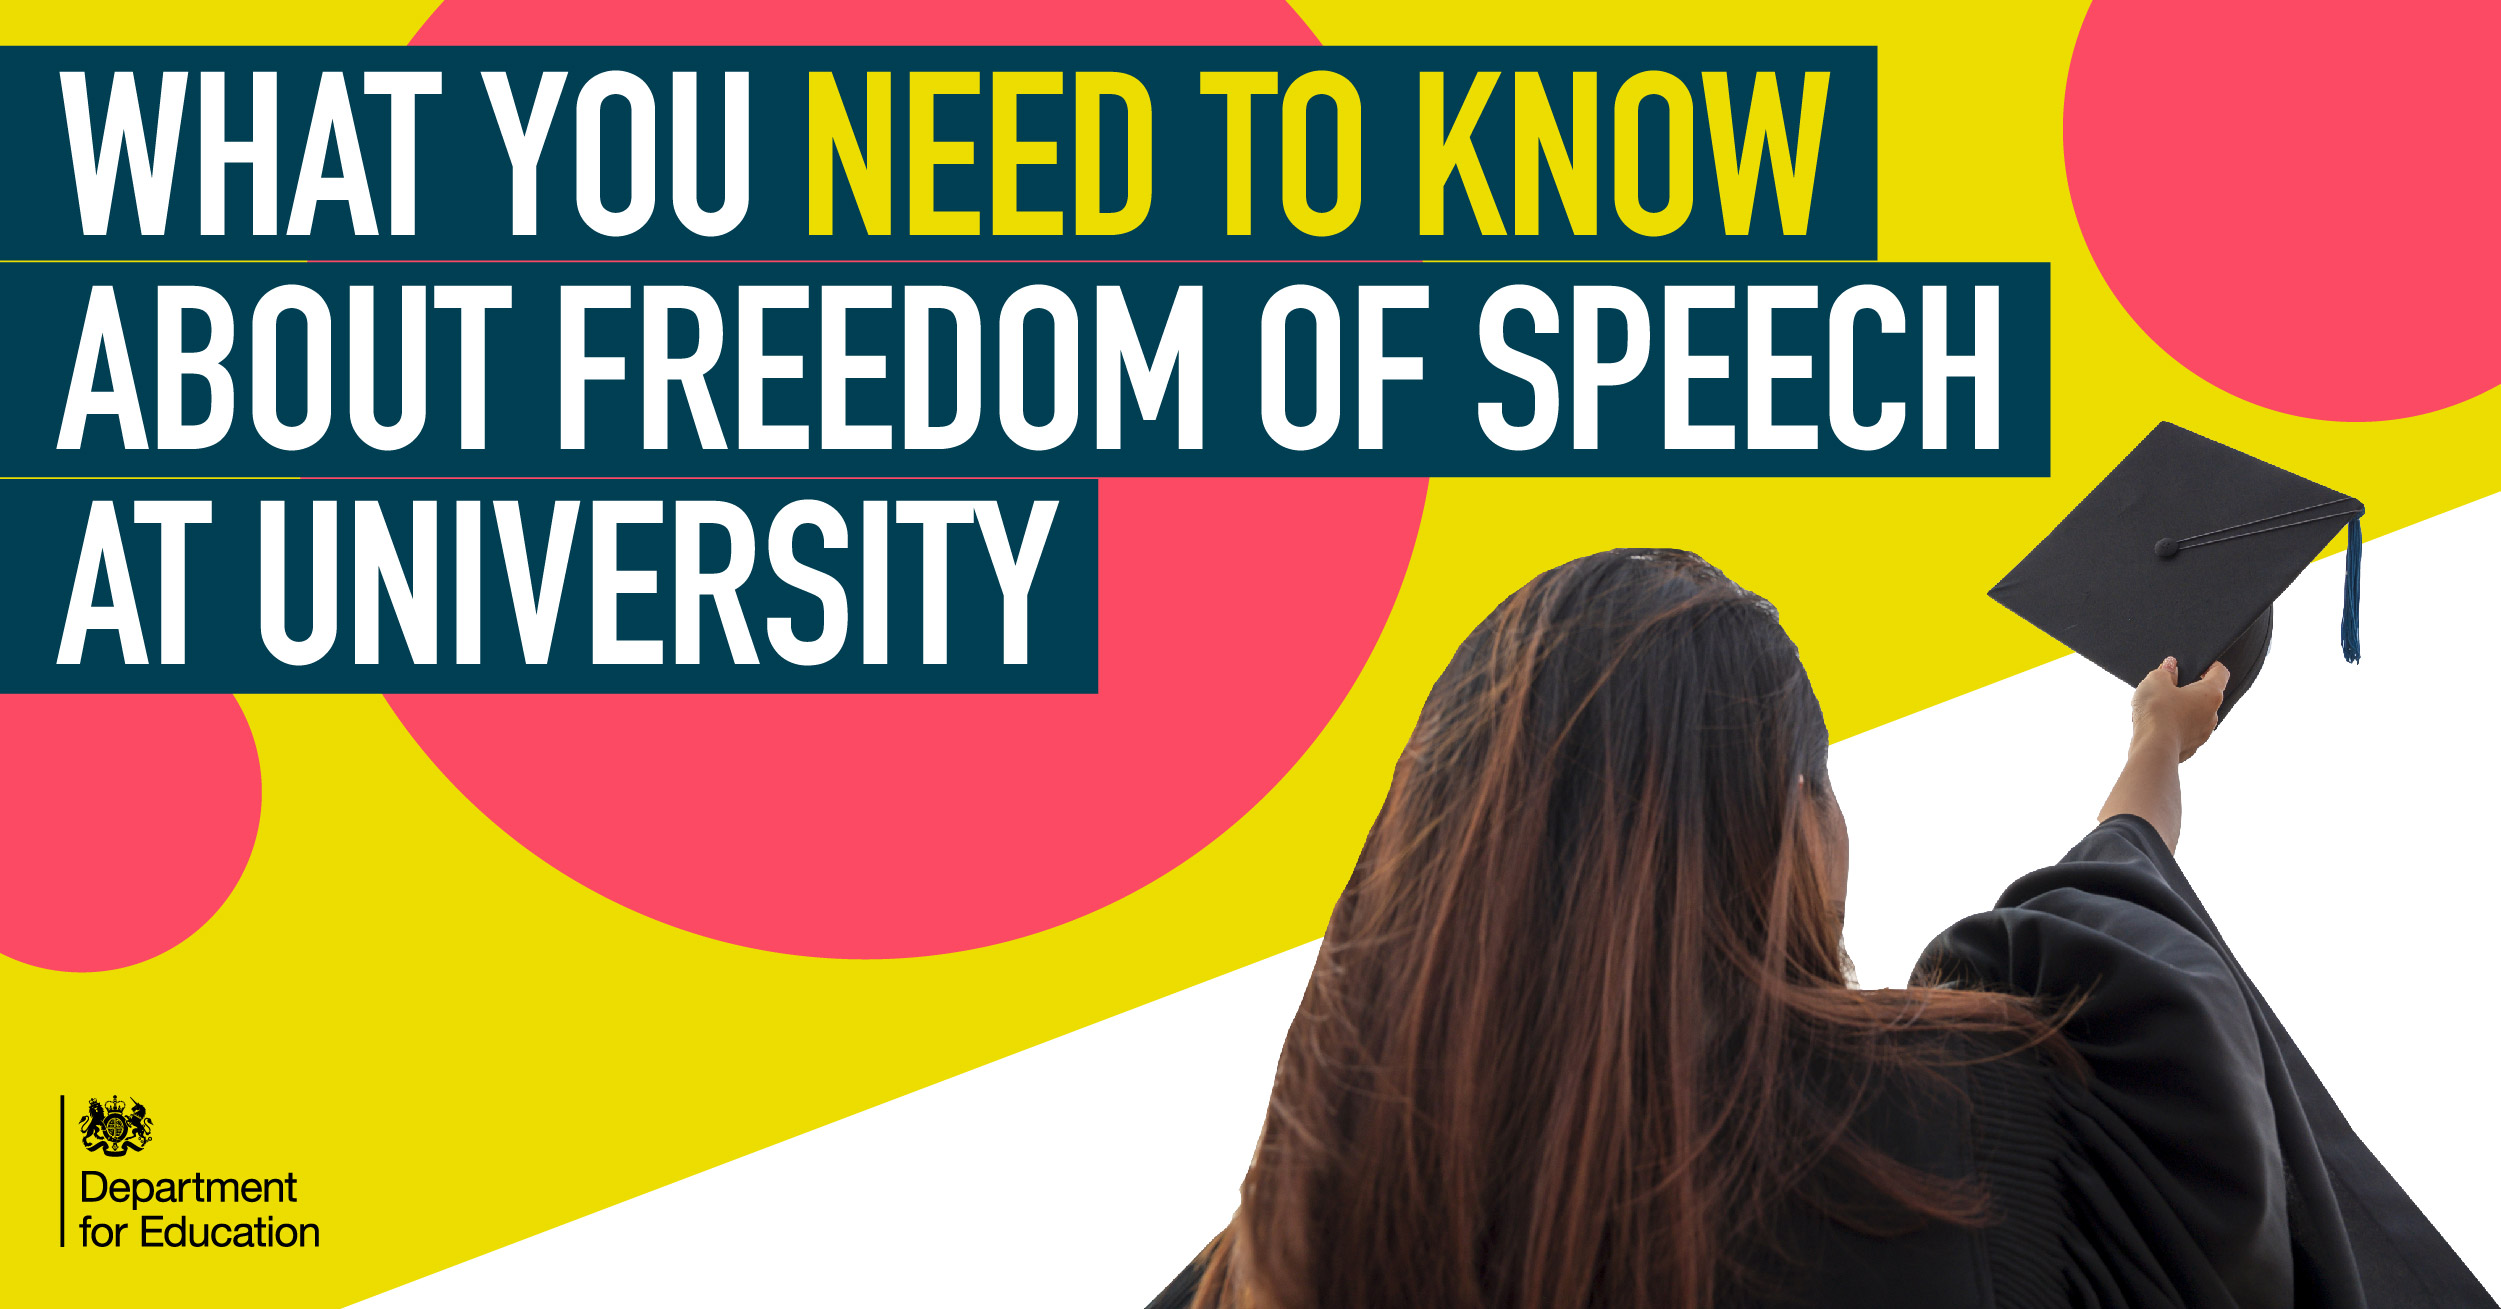 What you need to know about freedom of speech at university and why protecting it is so important - The Education Hub